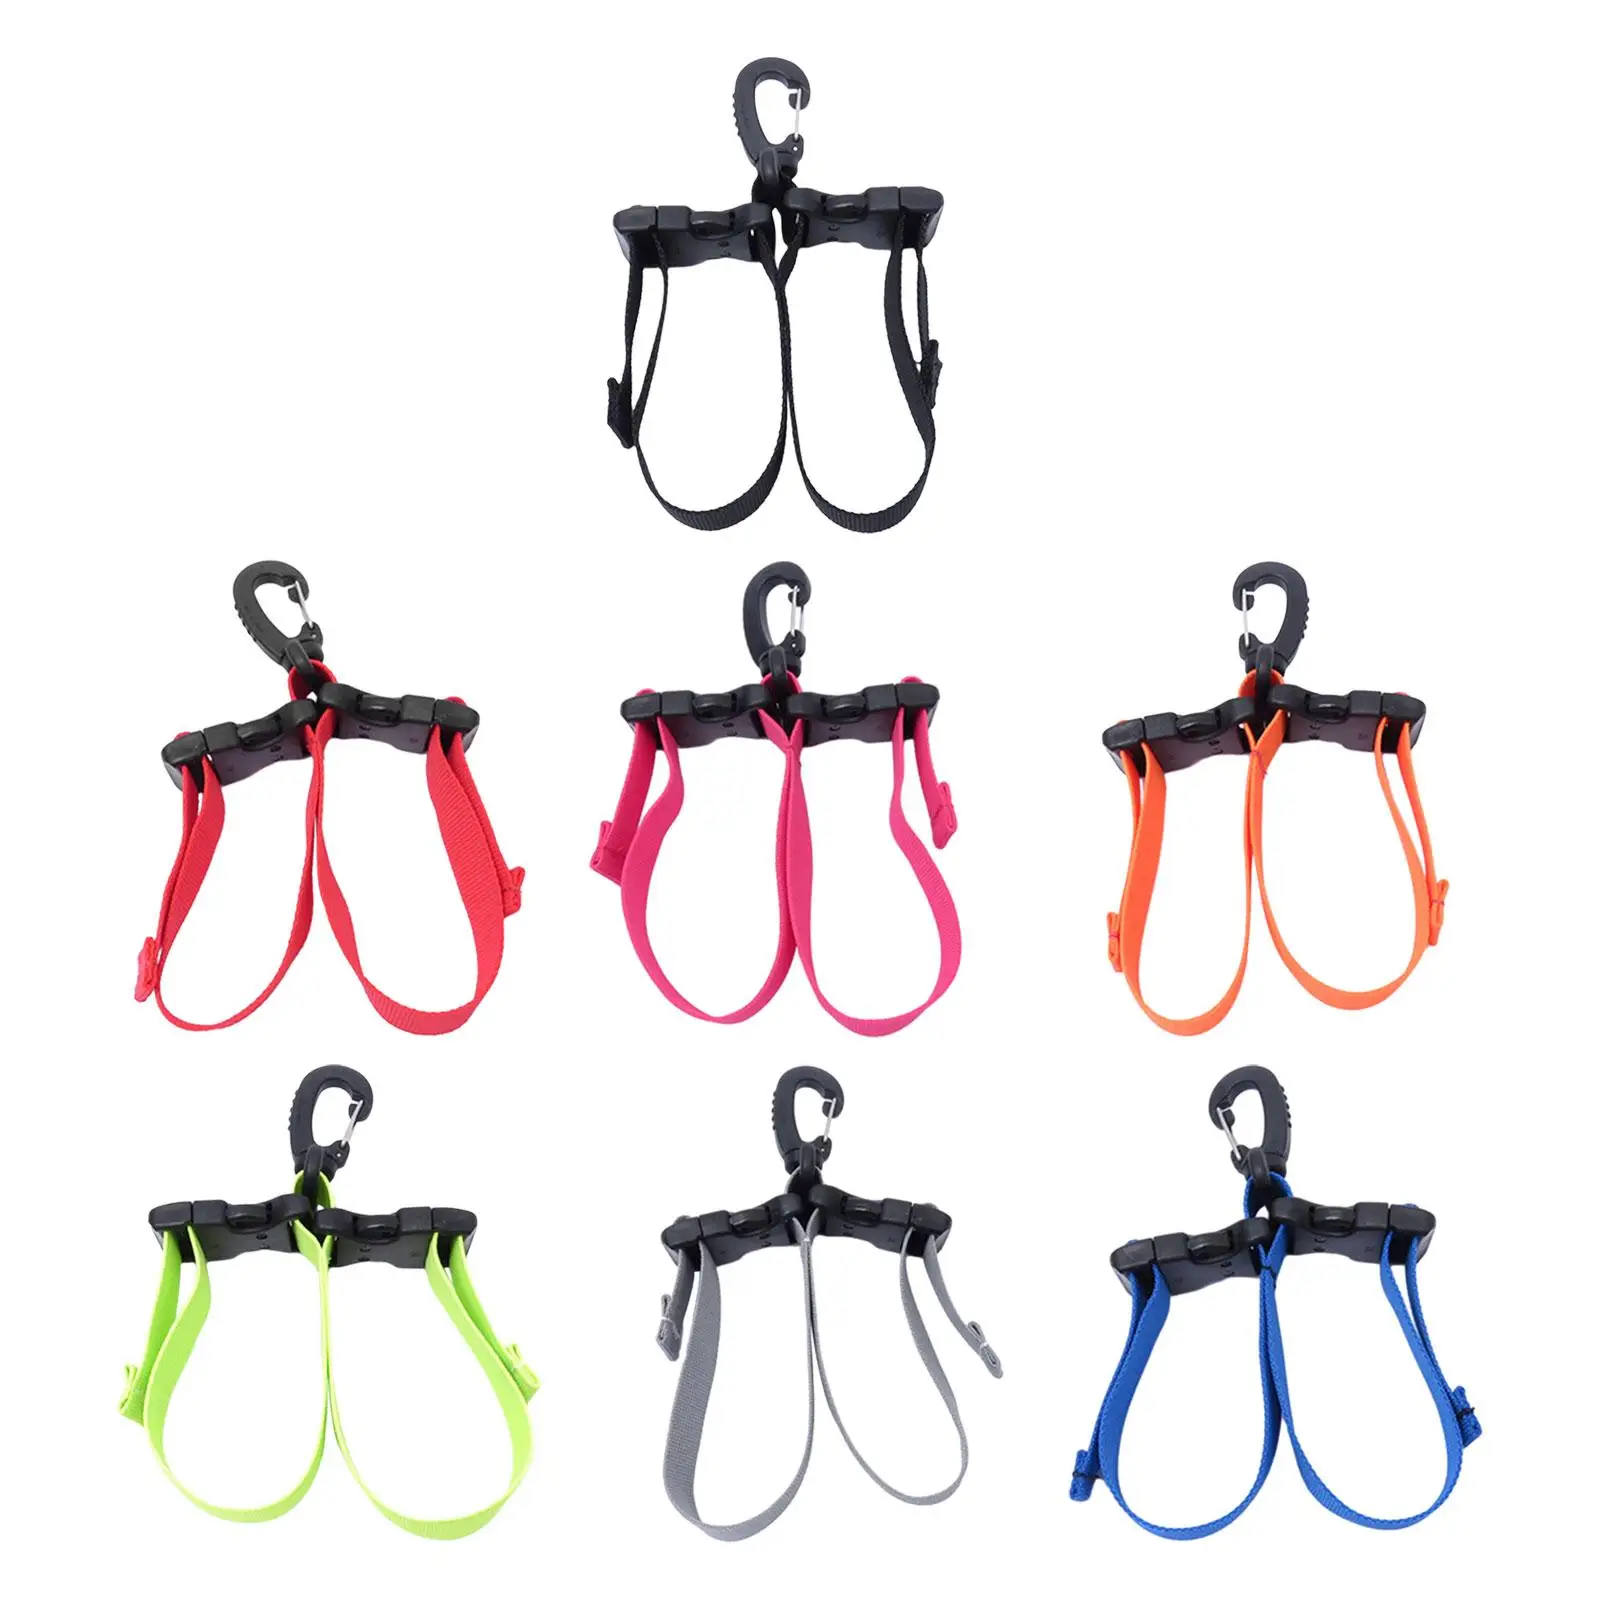 Diving Fins Keeper Strap Equipment Quick Release Buckles for Freediving